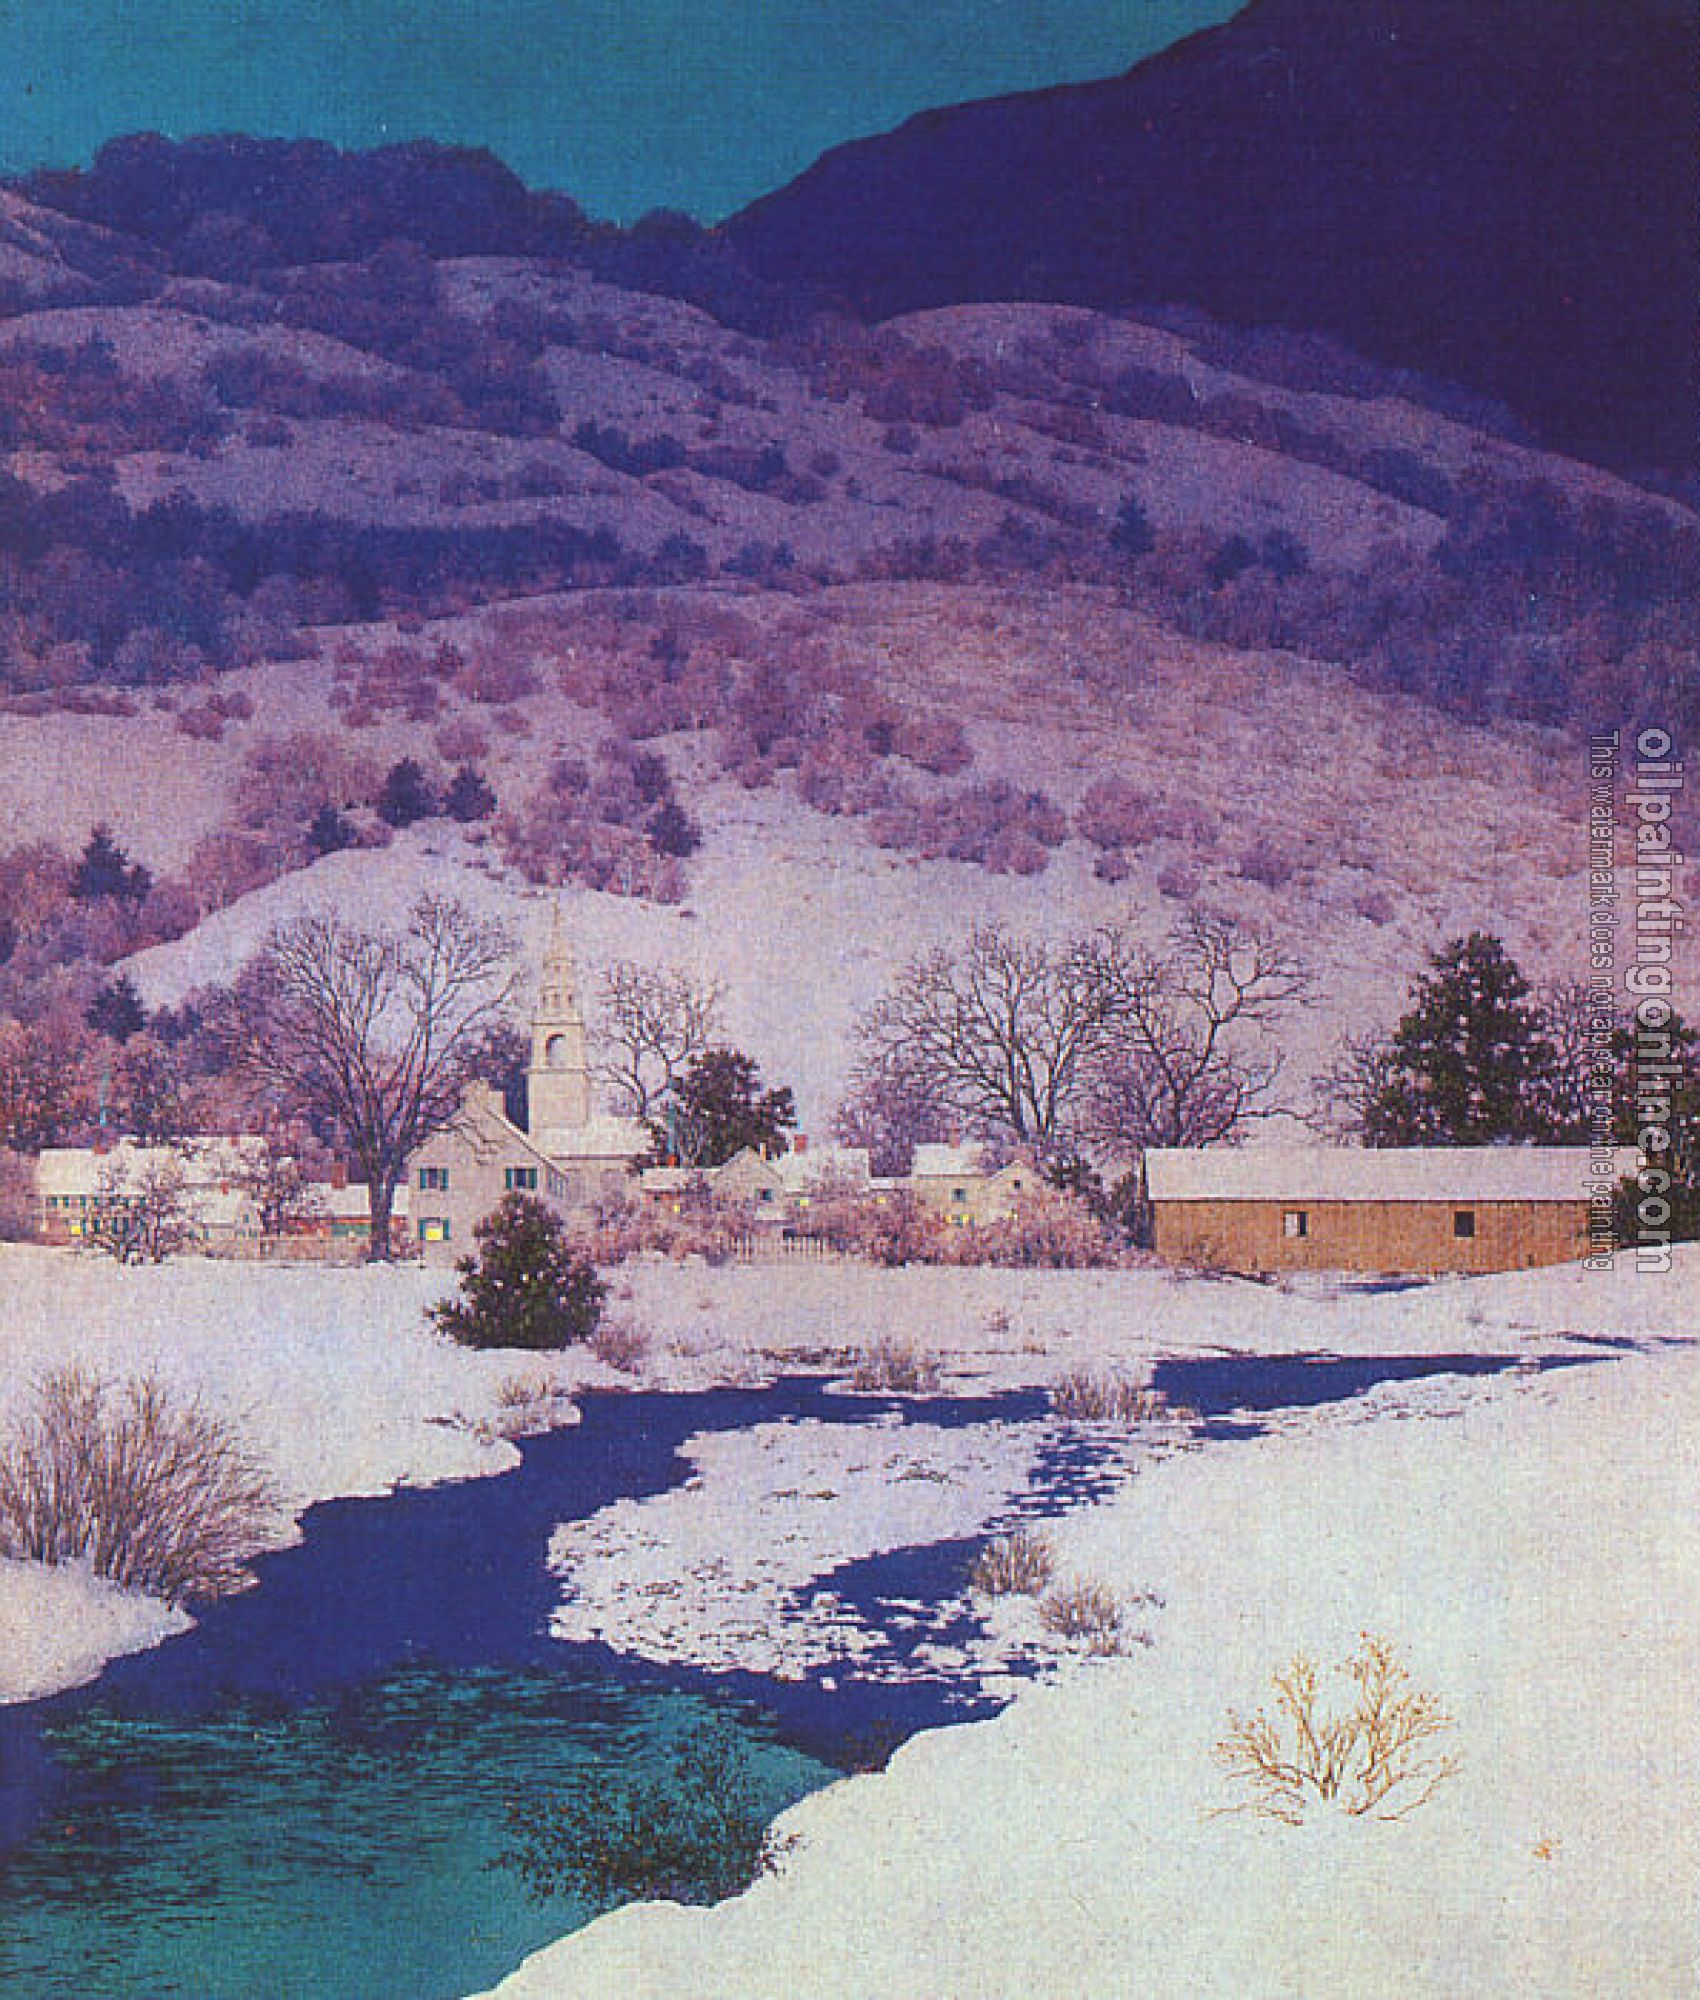 Parrish, Maxfield - Christmas Eve  Deep Valley